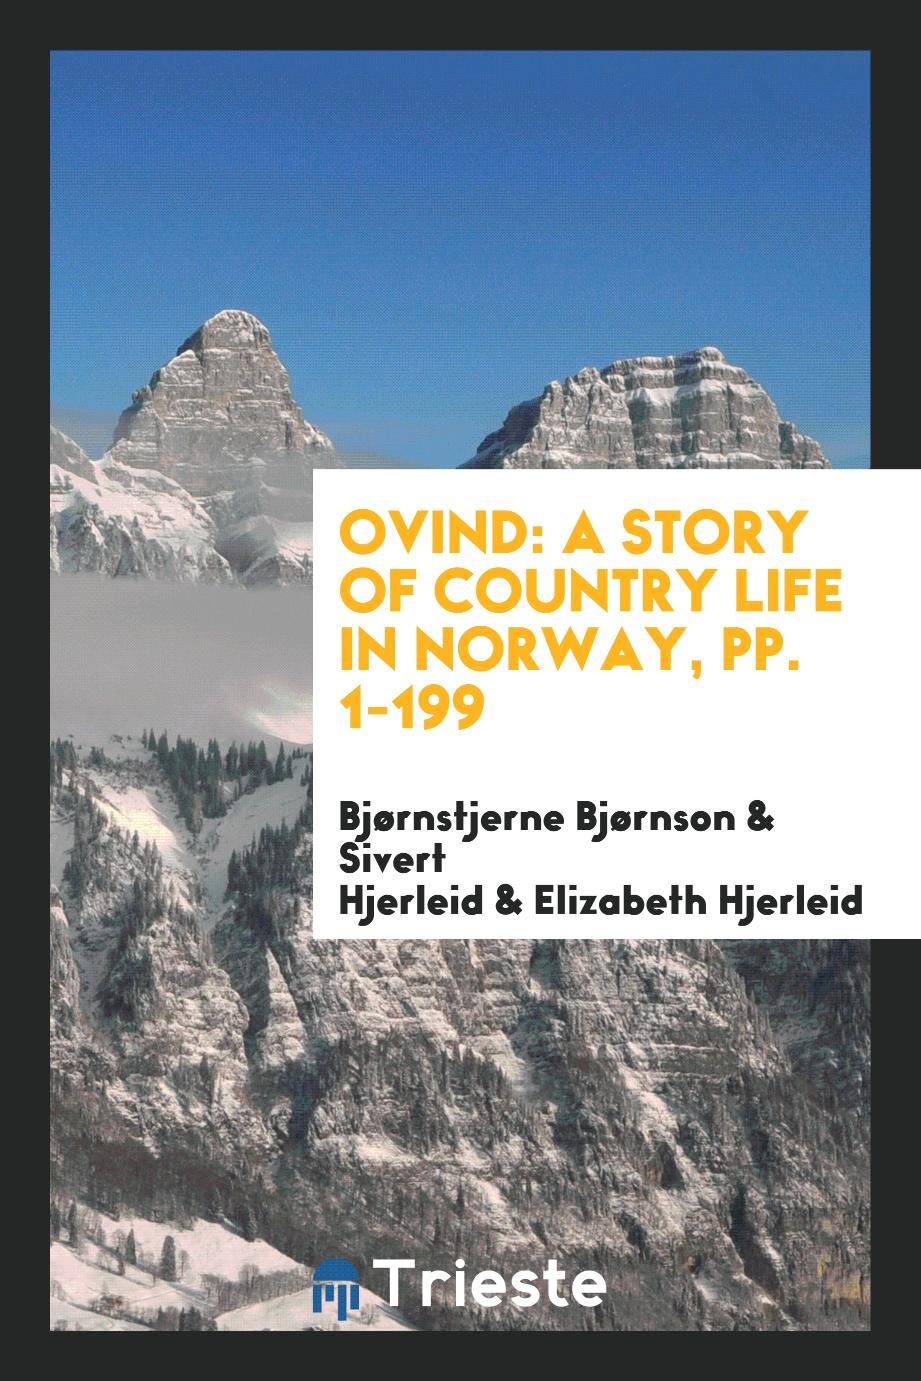 Ovind: A Story of Country Life in Norway, pp. 1-199